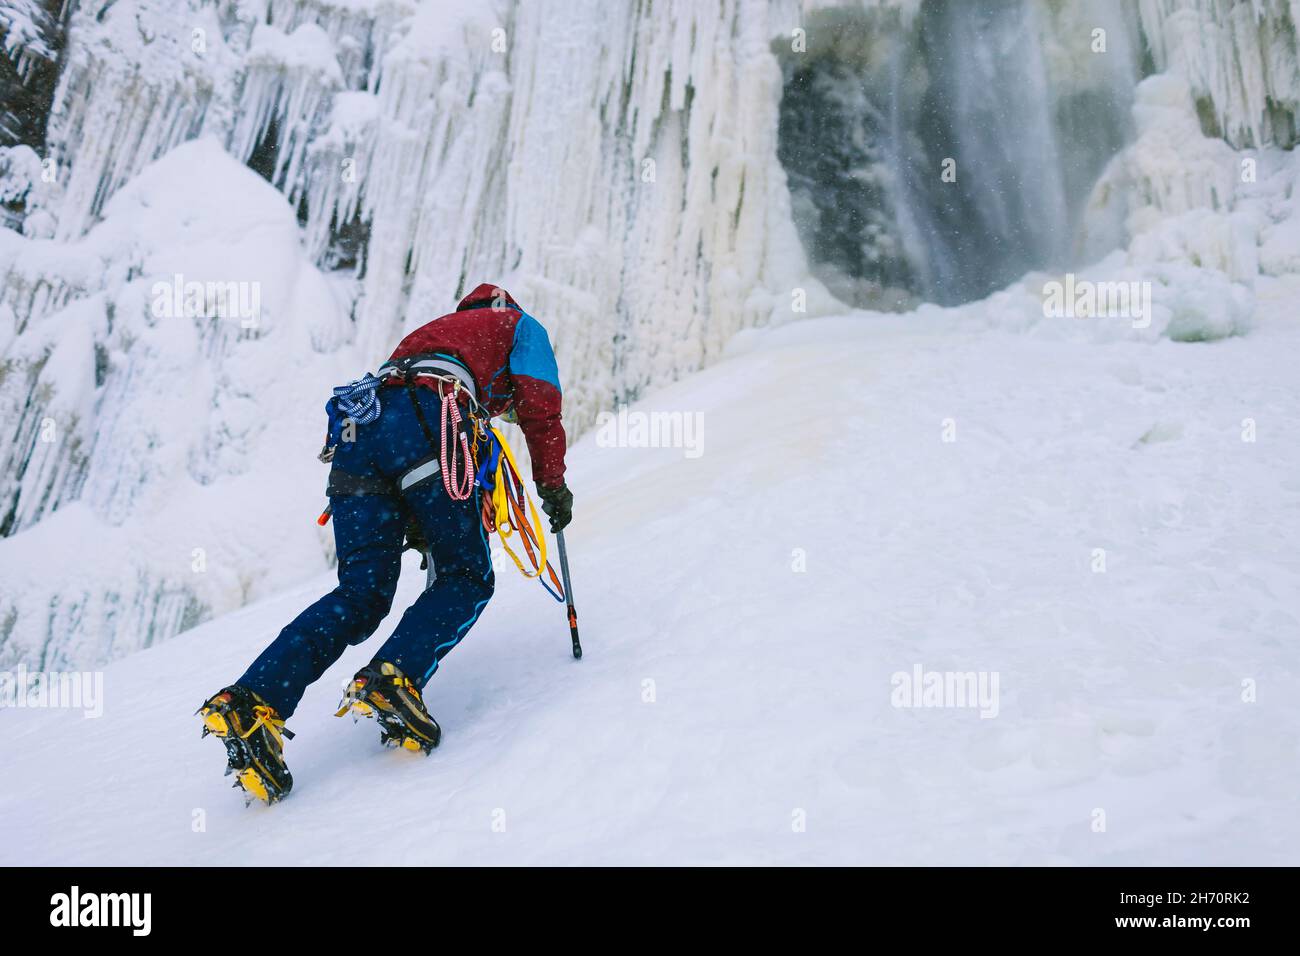 Female ice climber ascending snowy hill Stock Photo